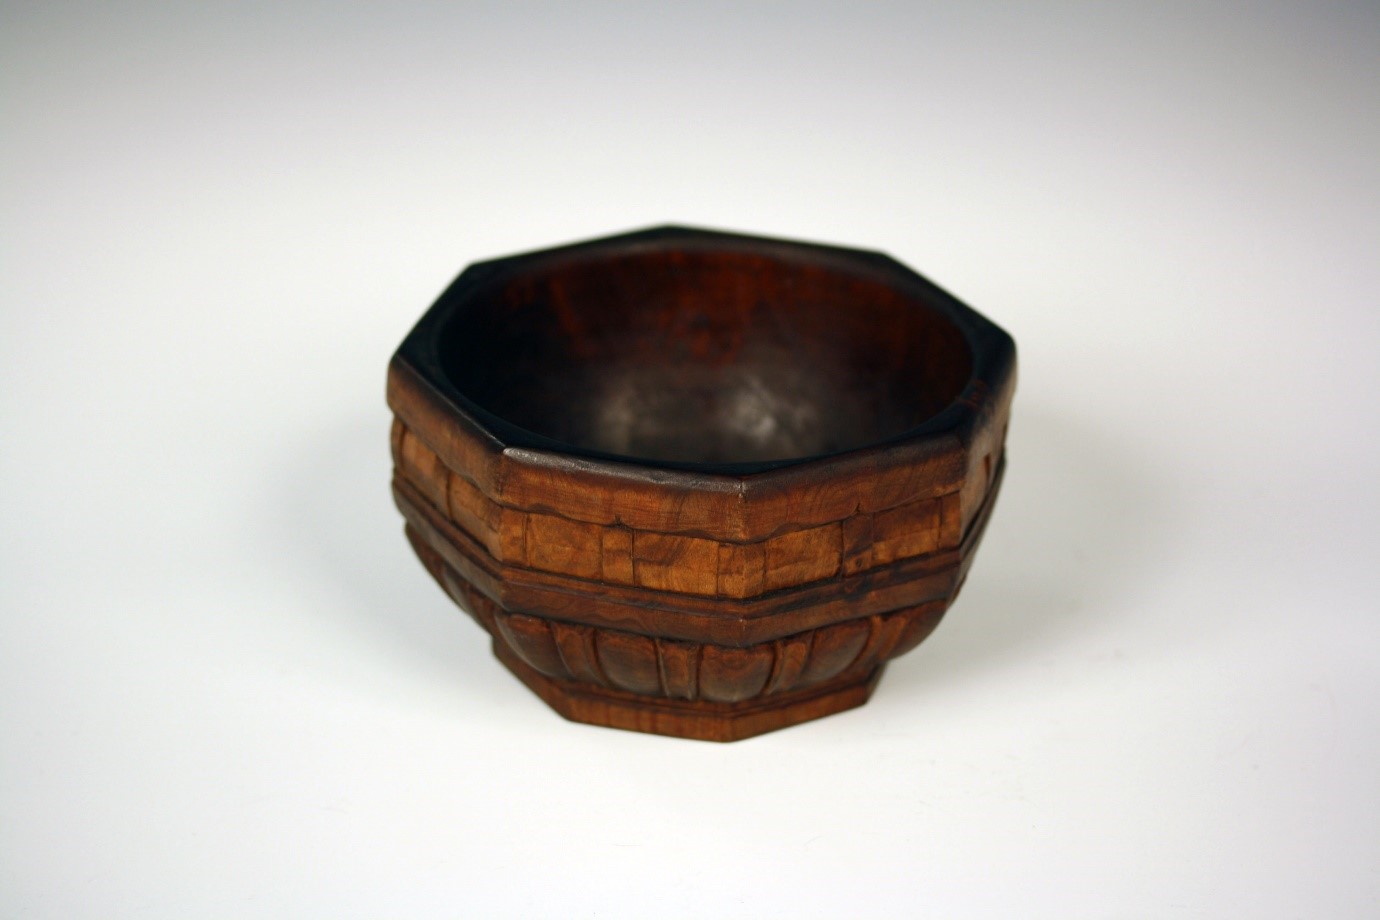 Wooden bowl made from the lime tree in old Garden Court, about 1920-40 (Bank of England Museum: A237)